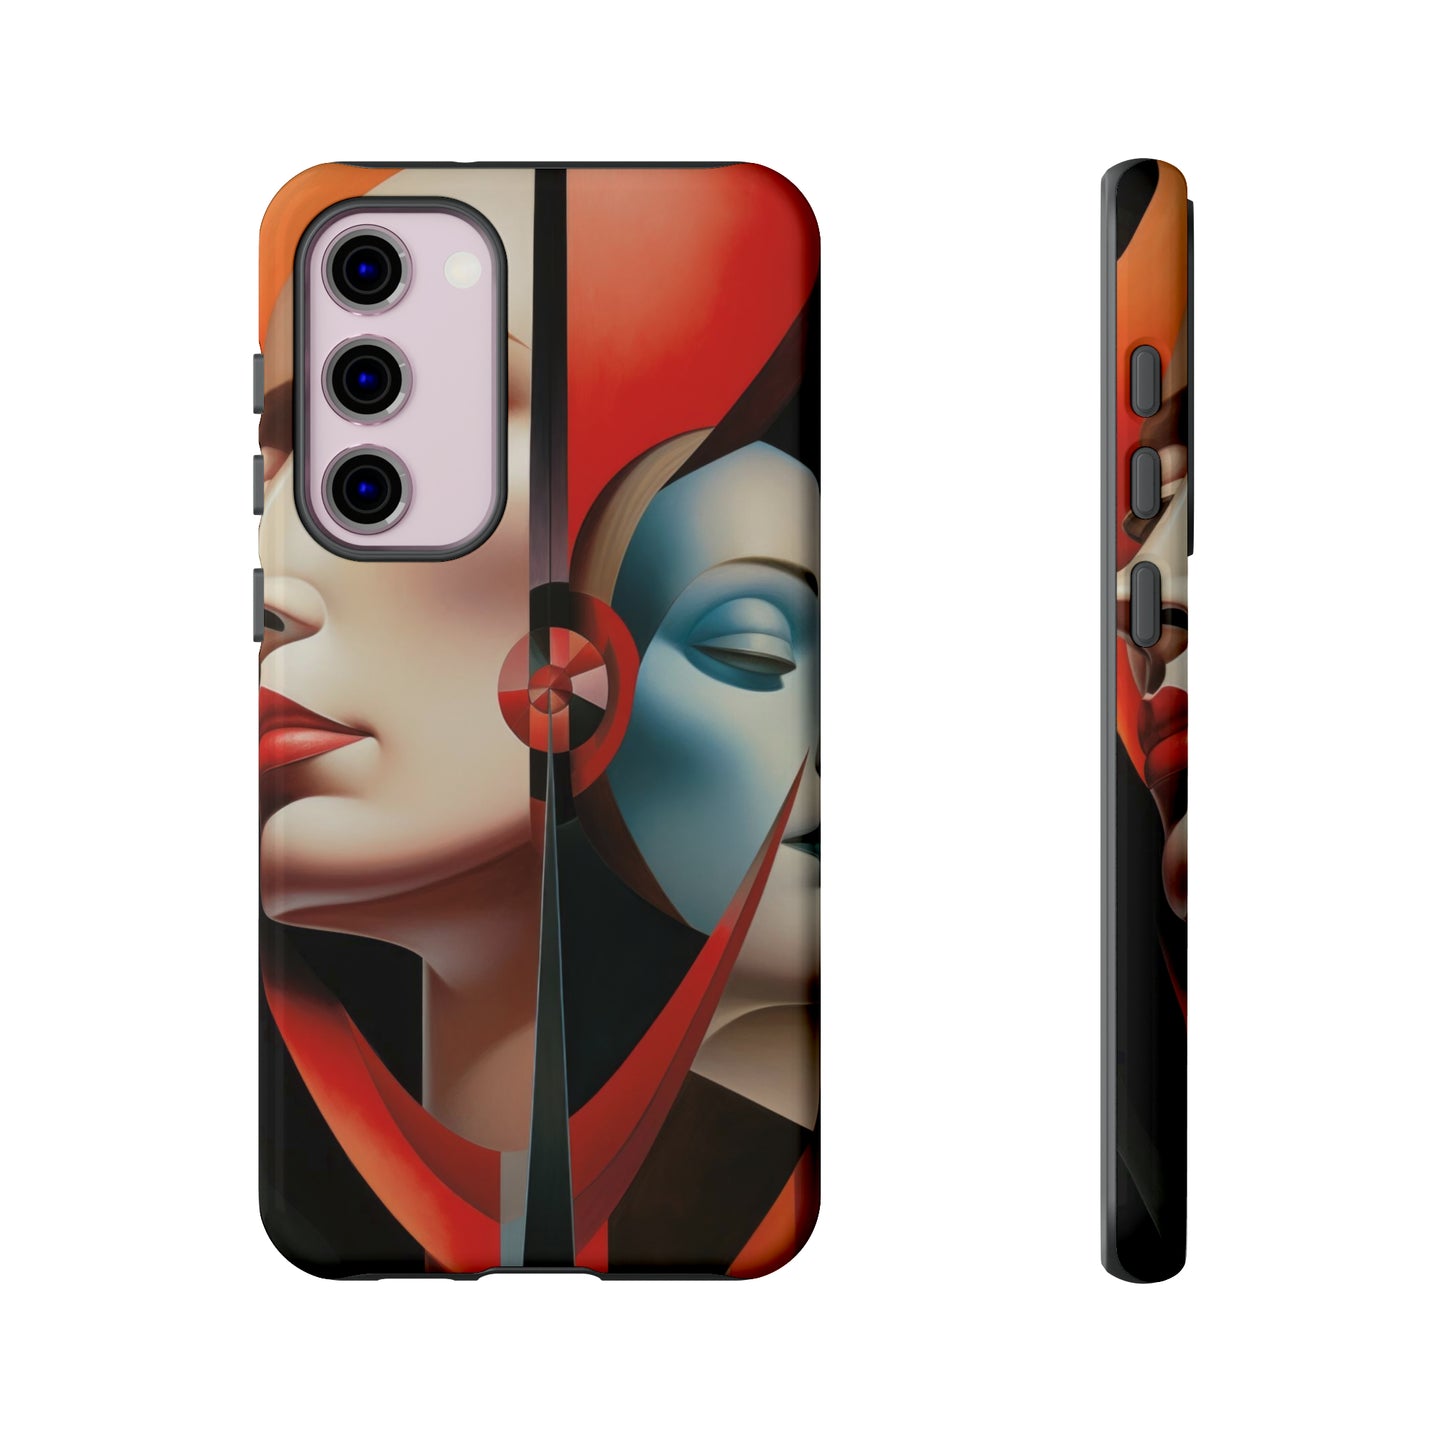 Surreal Dual Emotion Faces Phone Case - Masked Red & Blue Moods for iPhone, Samsung, Pixel